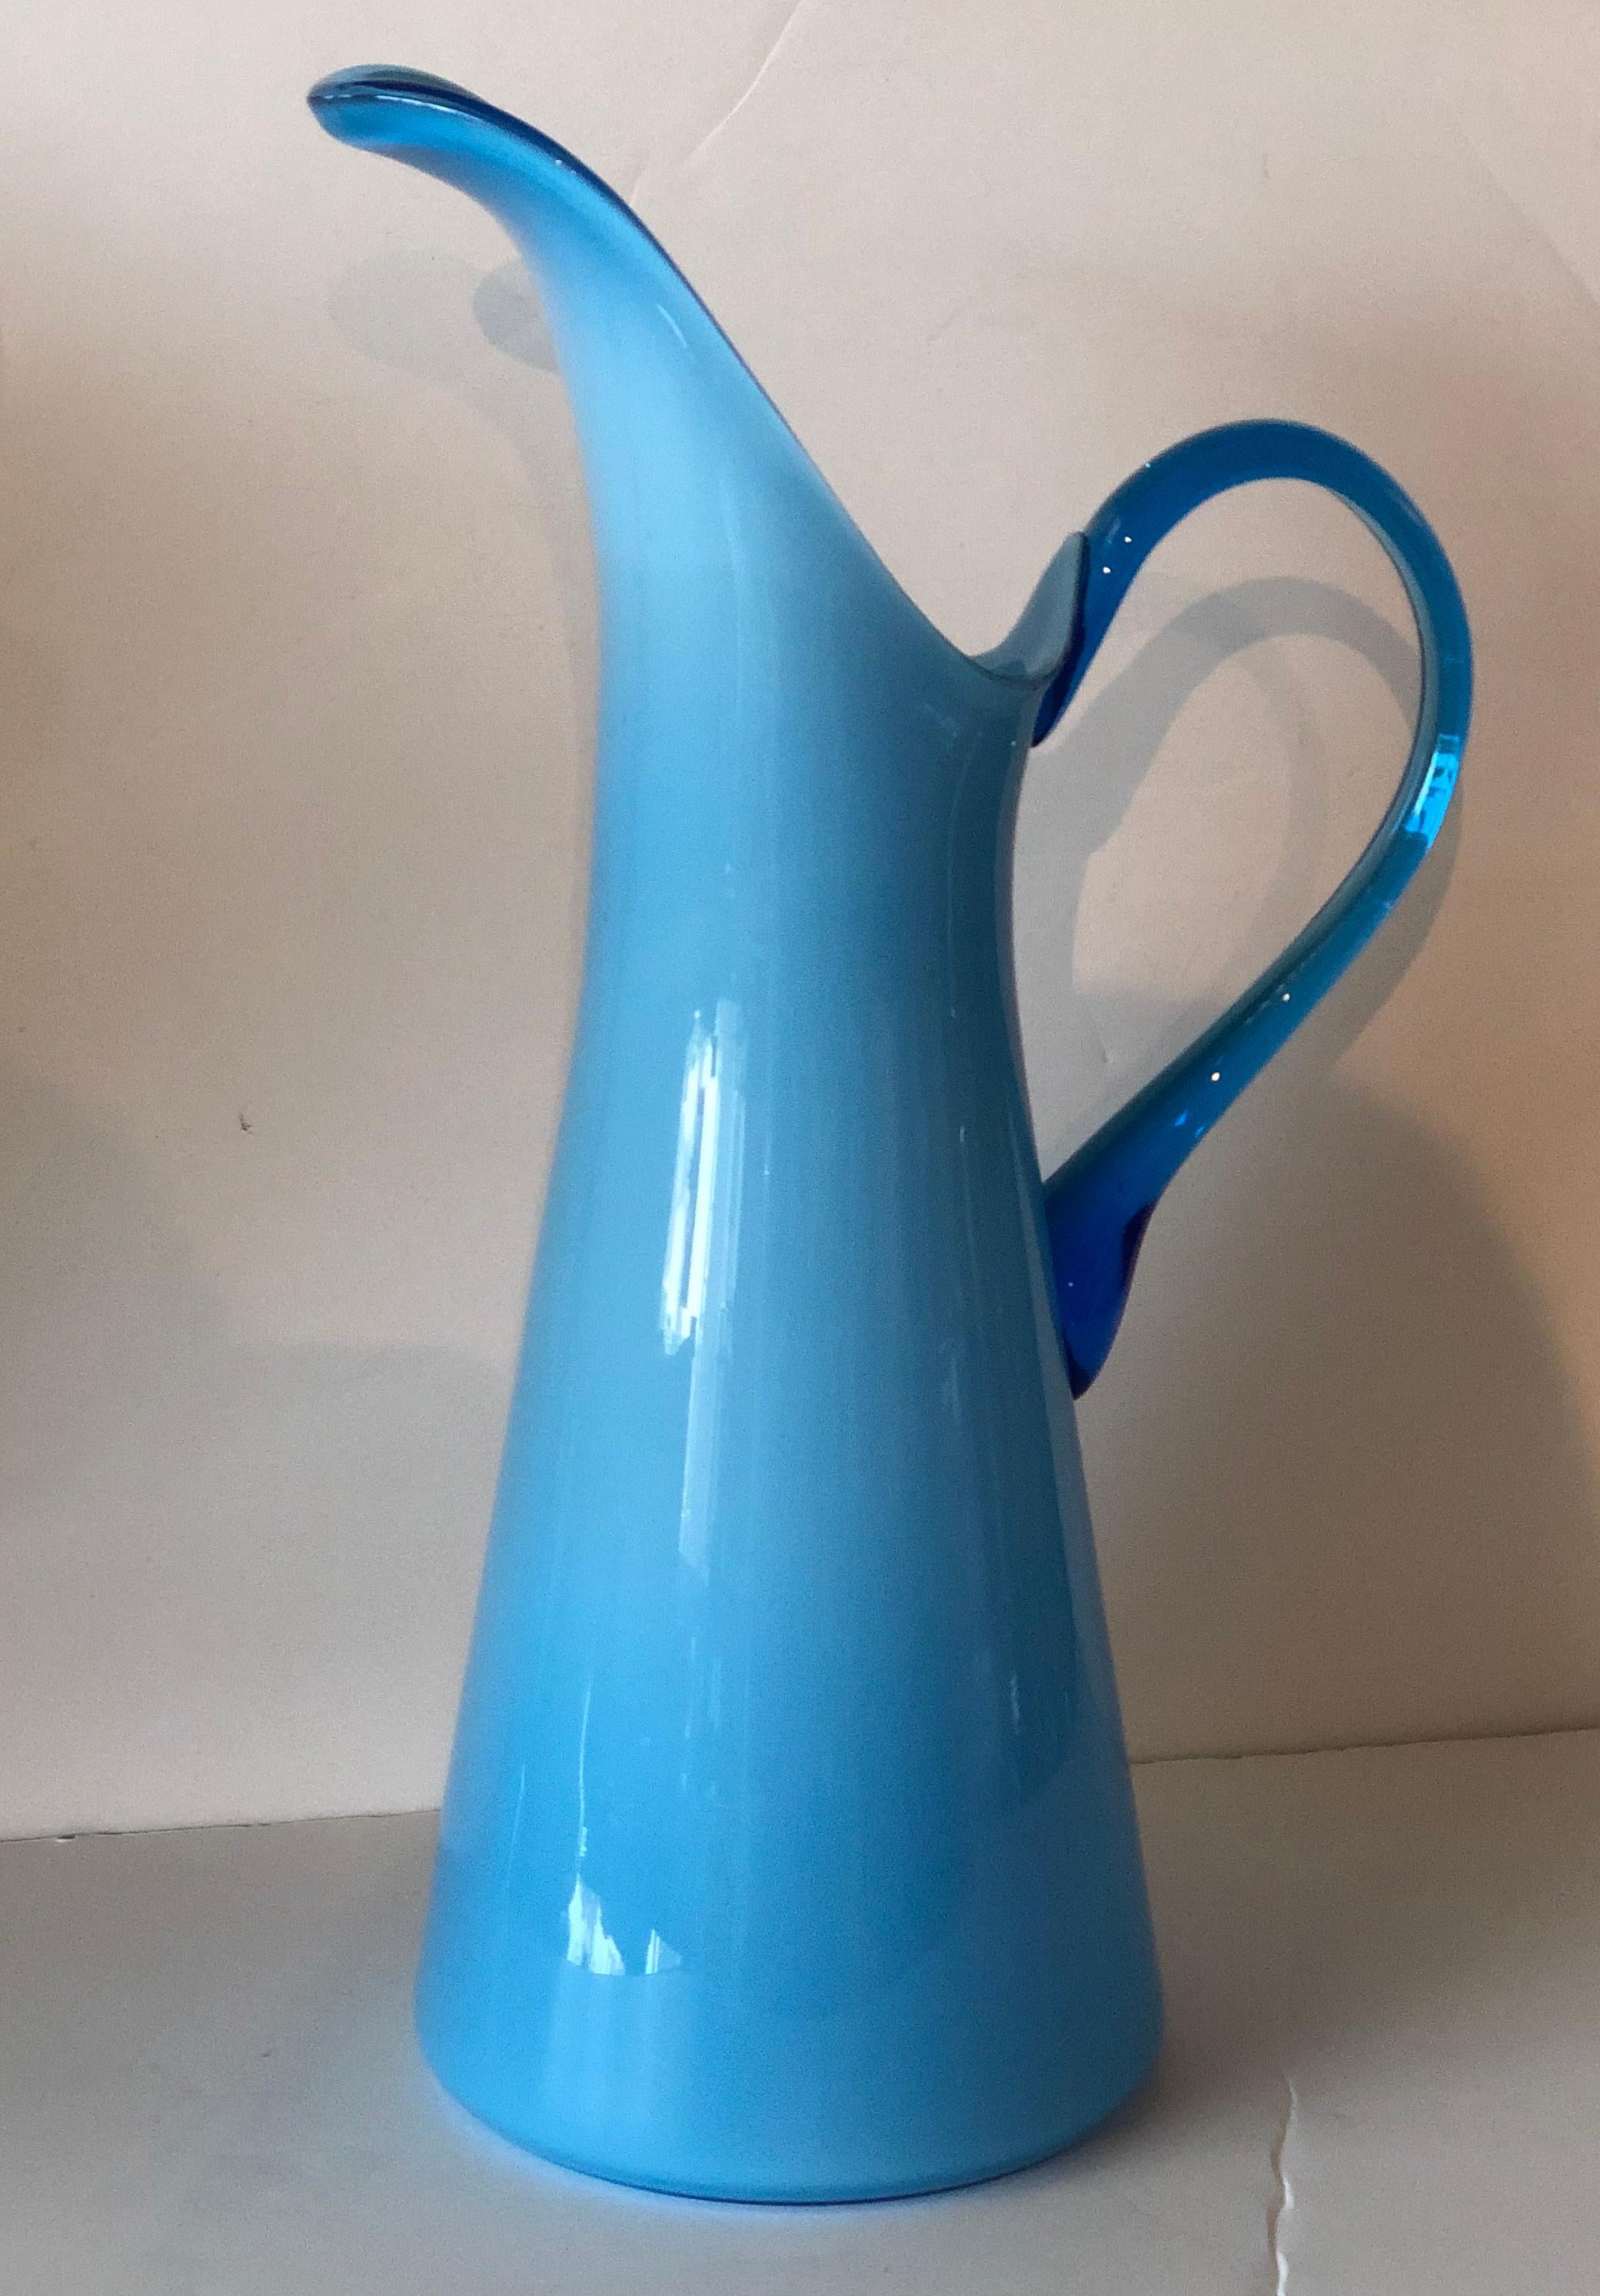 Offered is a Mid-Century Modern Italian Azure blue over white cased glass pitcher with translucent darker blue handle. This lovely shade of Azure blue Venetian glass pitcher would make a lovely gift for the holidays or any occasion. We suggest